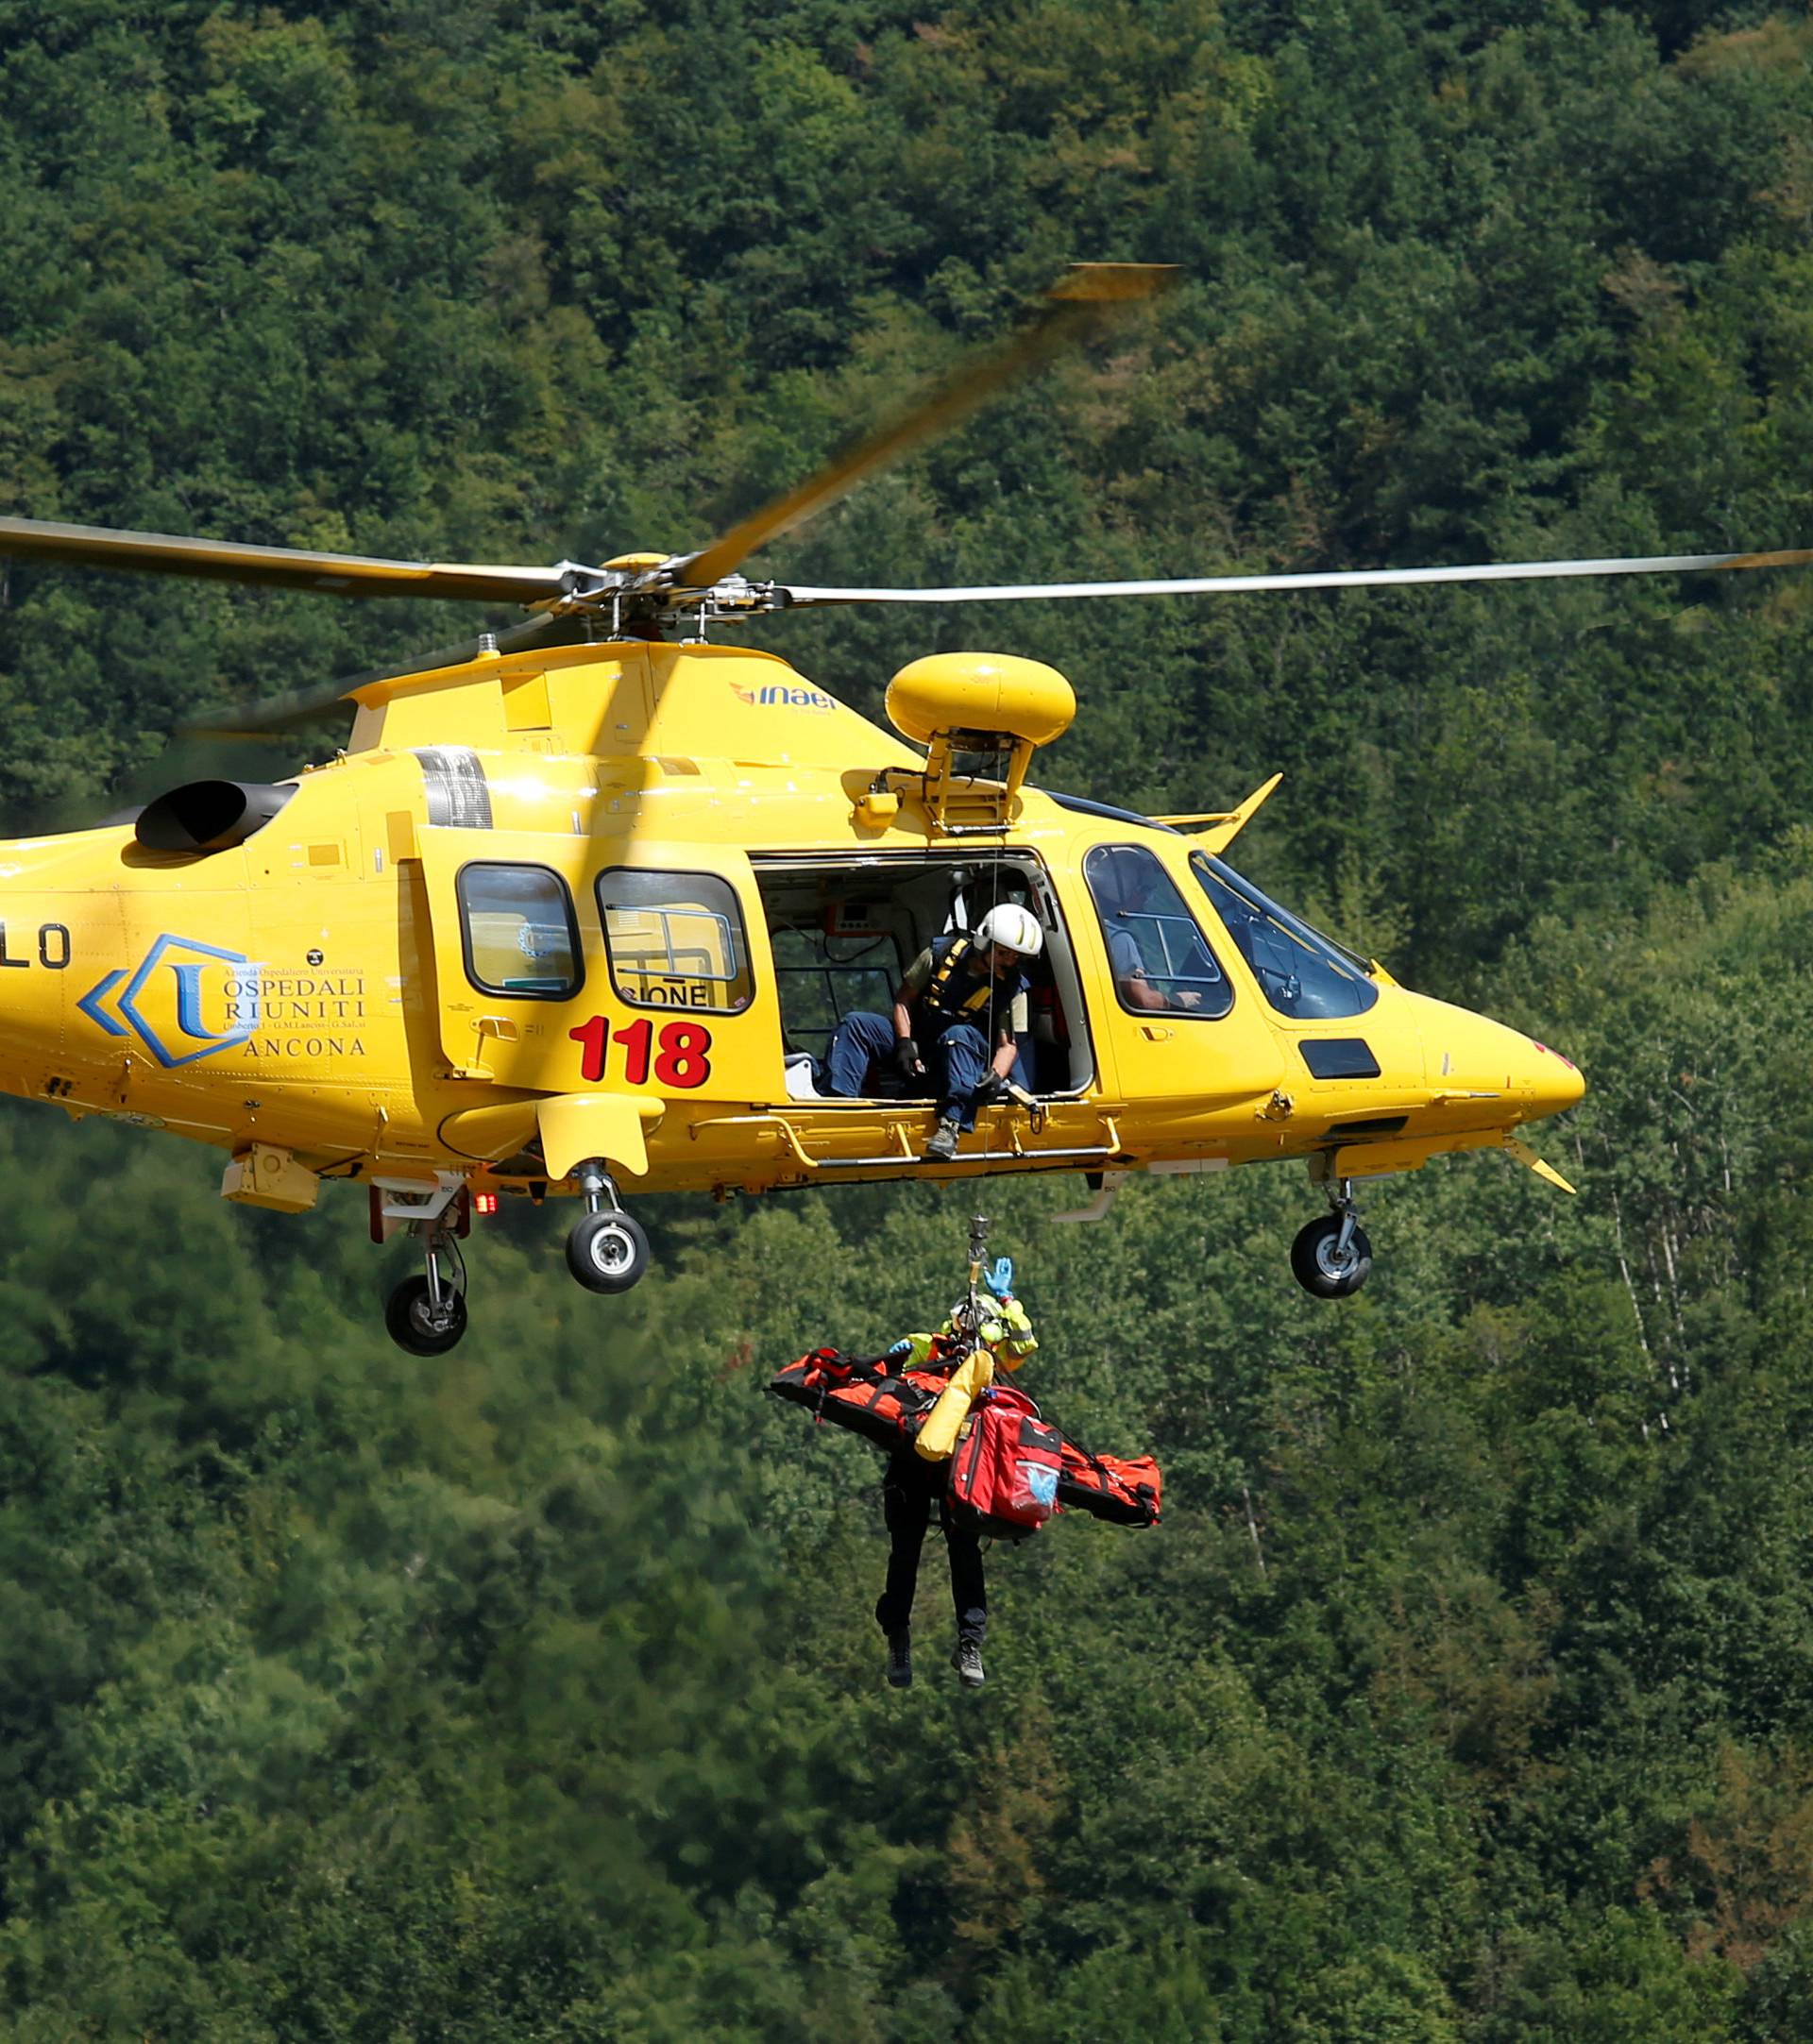 An injured person is rescued with a helicopter following an earthquake at Pescara del Tronto